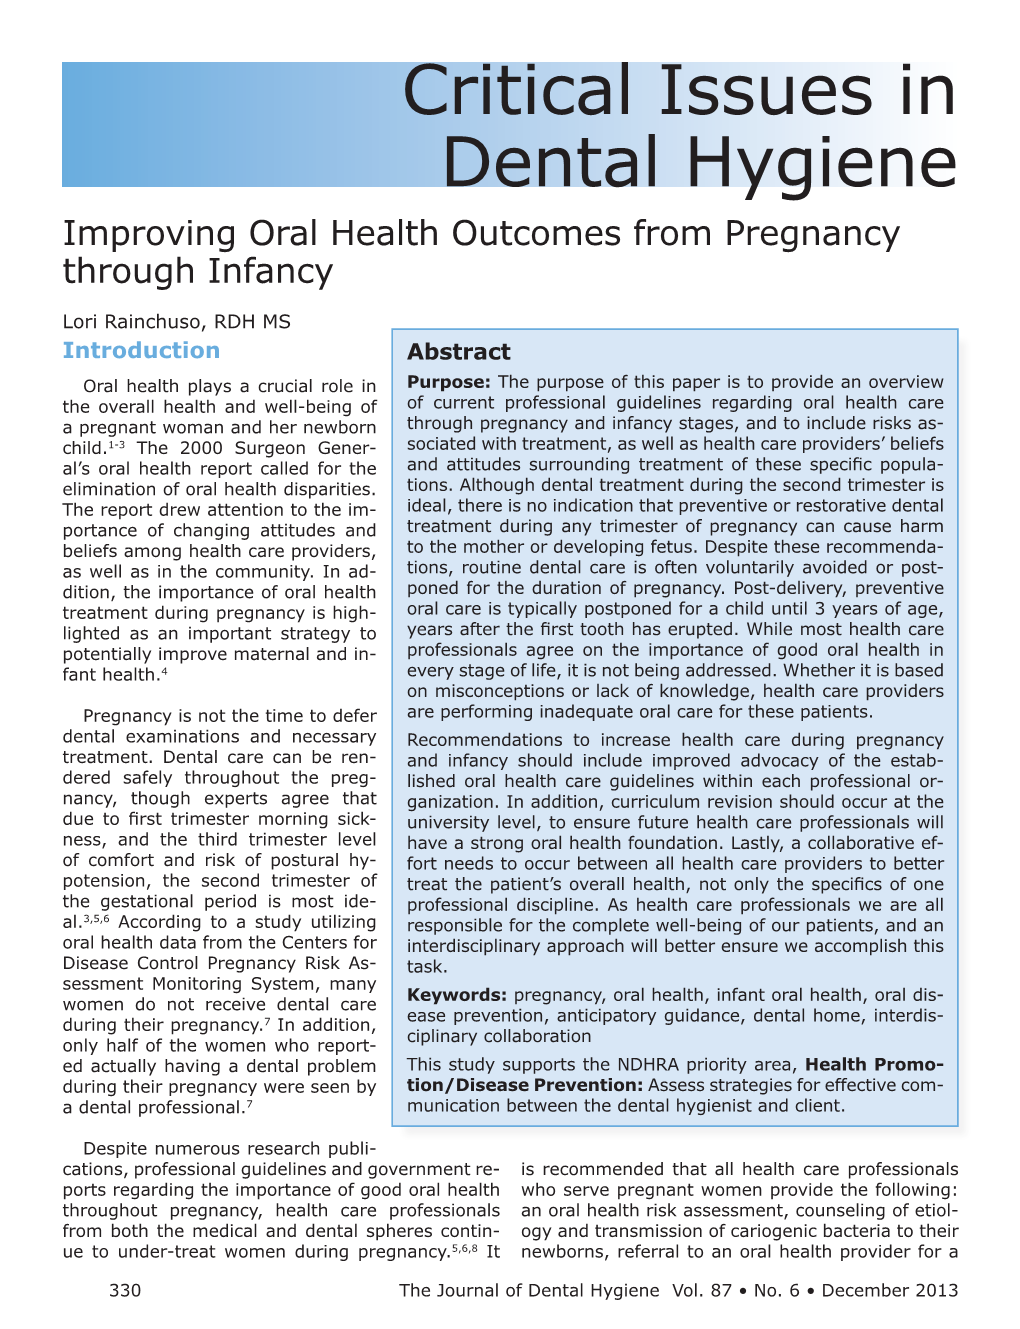 Critical Issues in Dental Hygiene Improving Oral Health Outcomes from Pregnancy Through Infancy